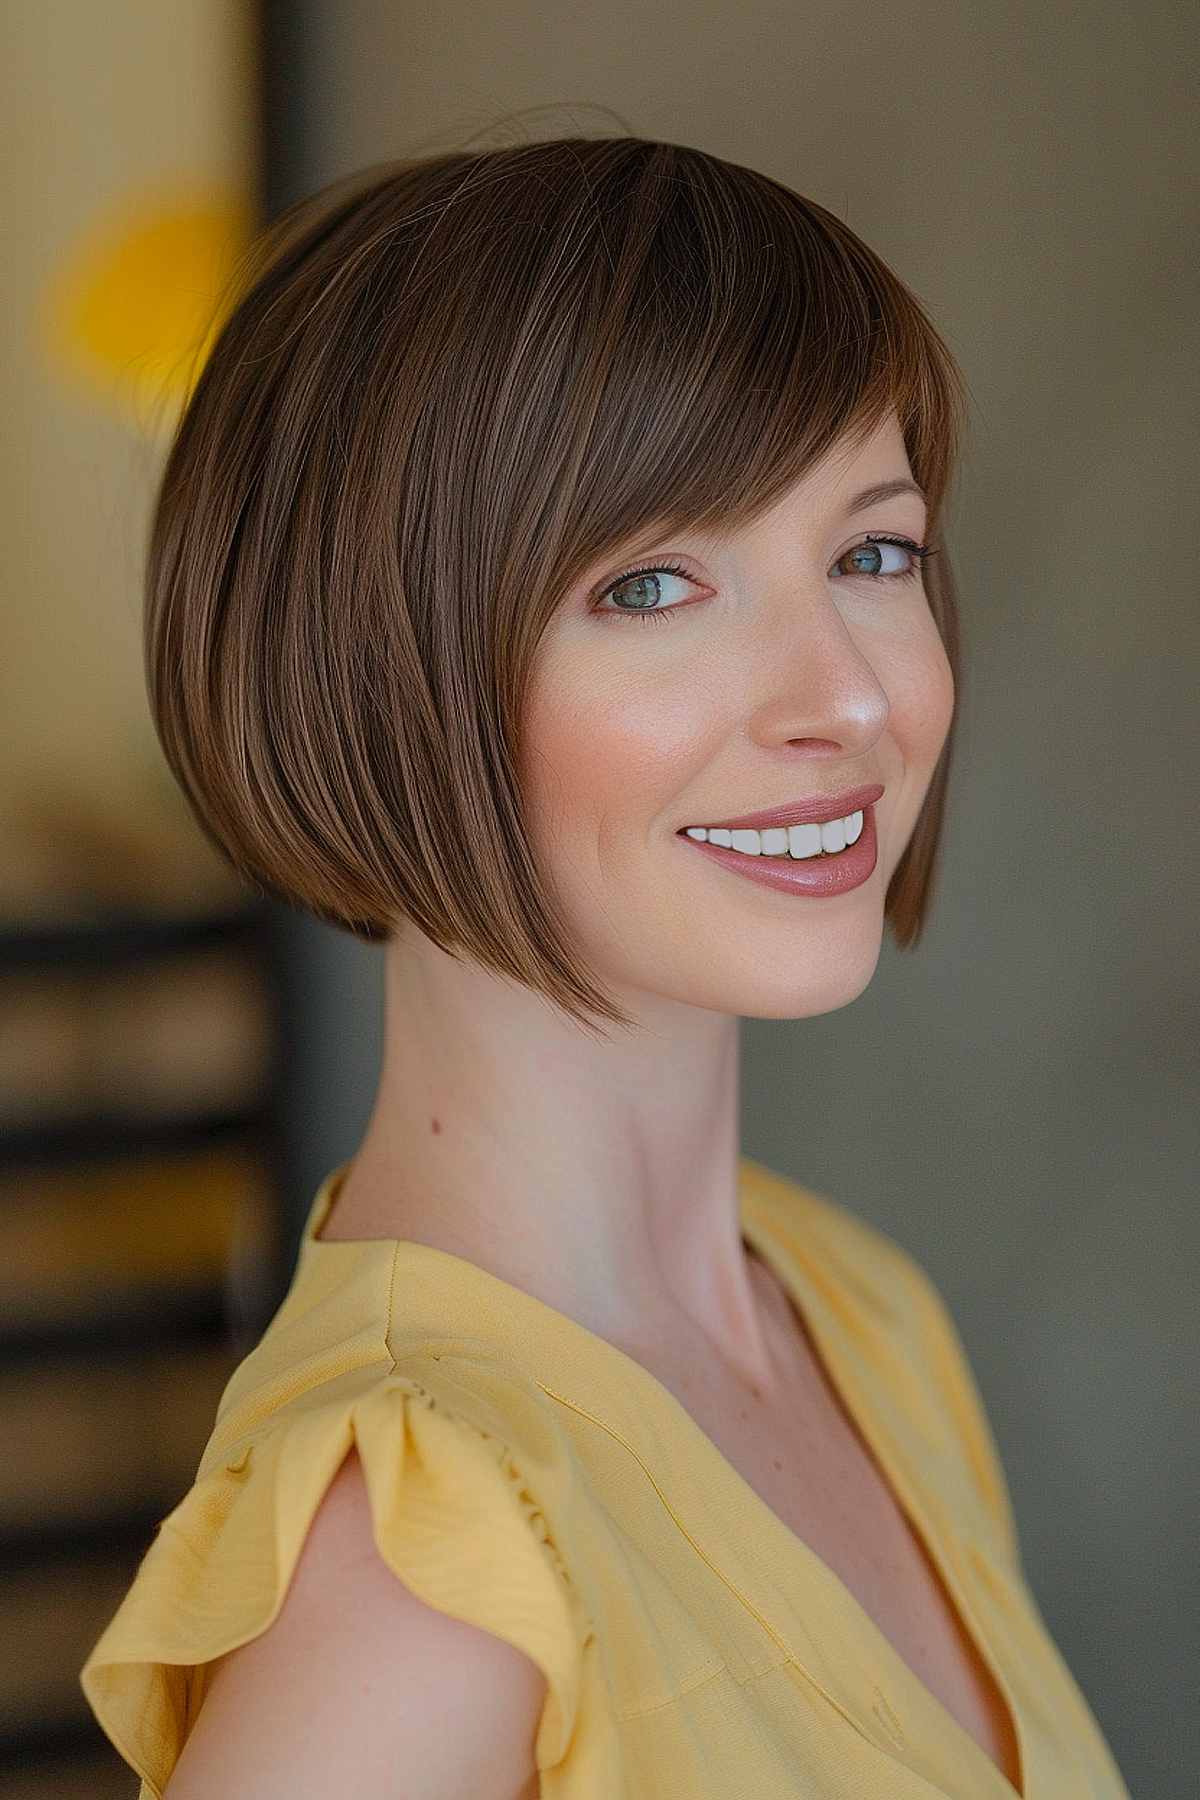 The chin-length bob with soft bangs gives a soft and sophisticated look.